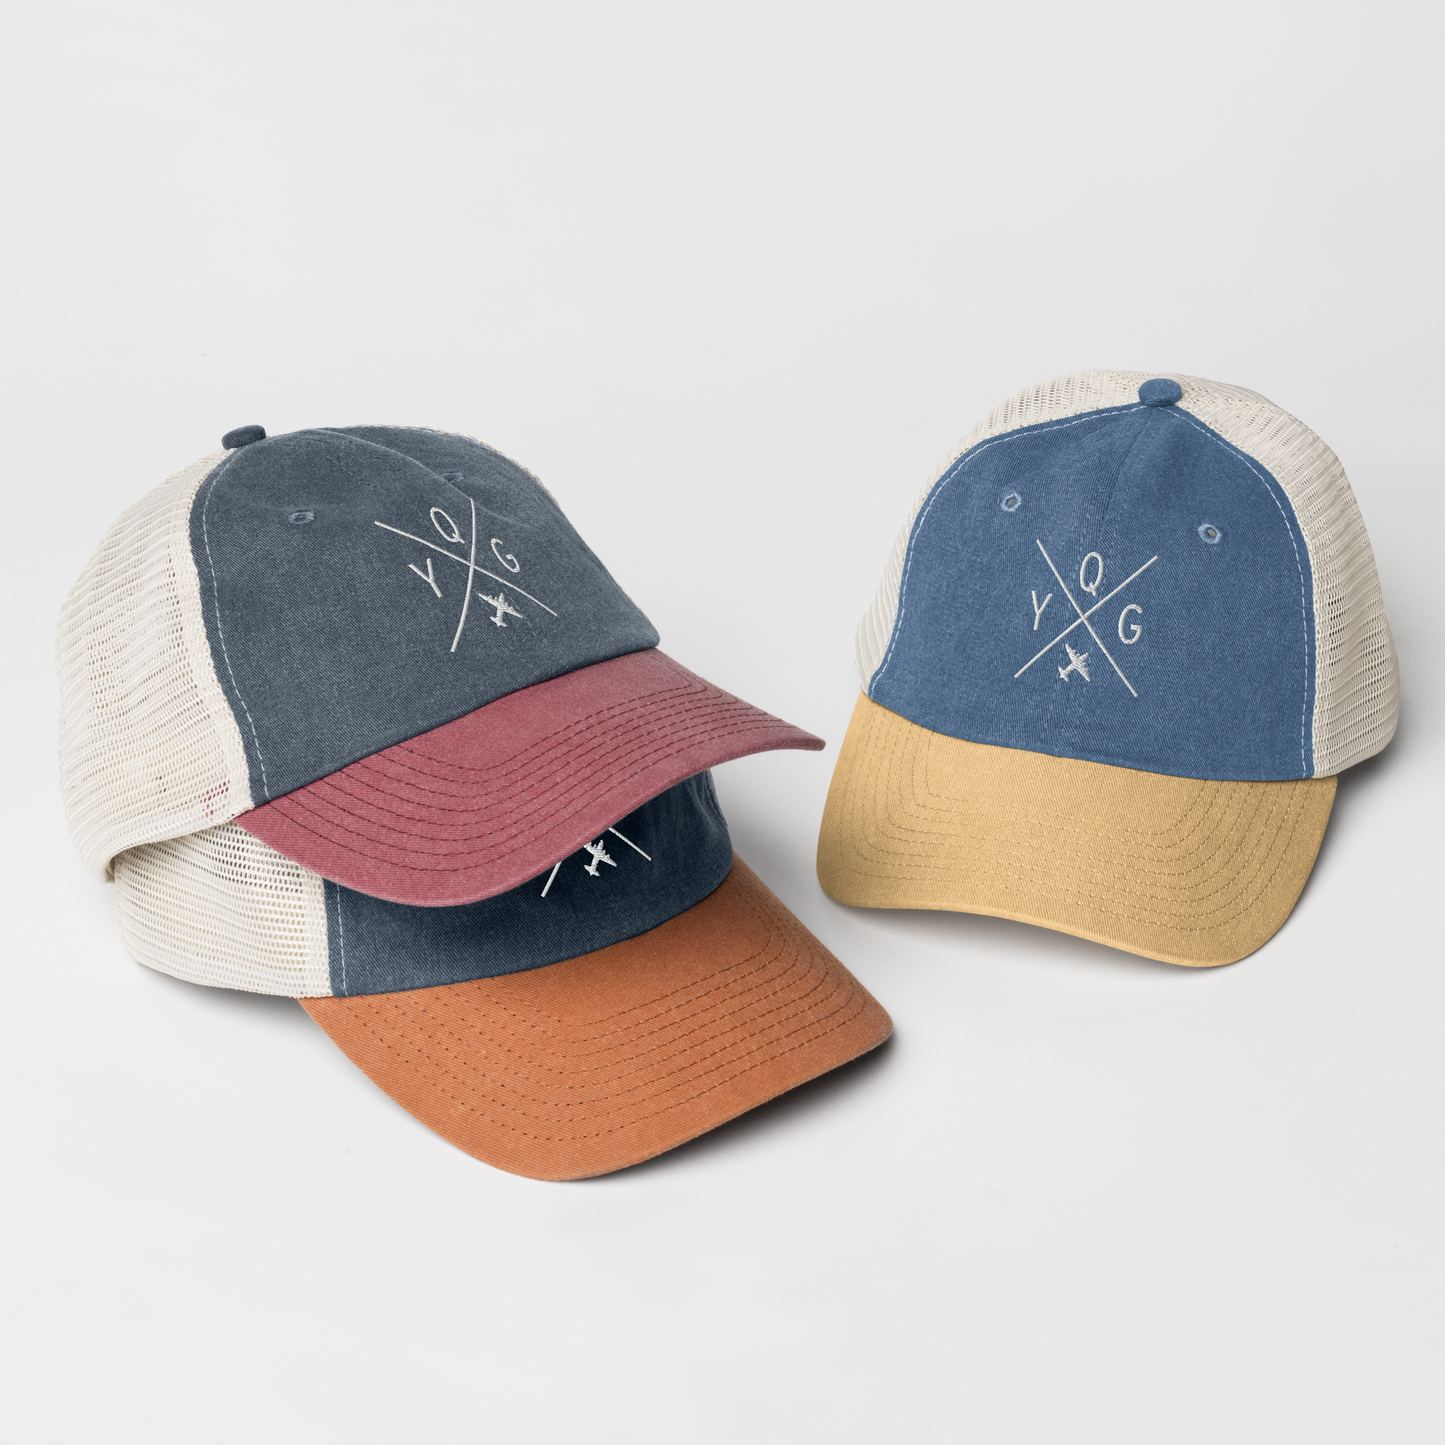 YHM Designs - YQG Windsor Pigment-Dyed Trucker Cap - Crossed-X Design with Airport Code and Vintage Propliner - White Embroidery - Image 05